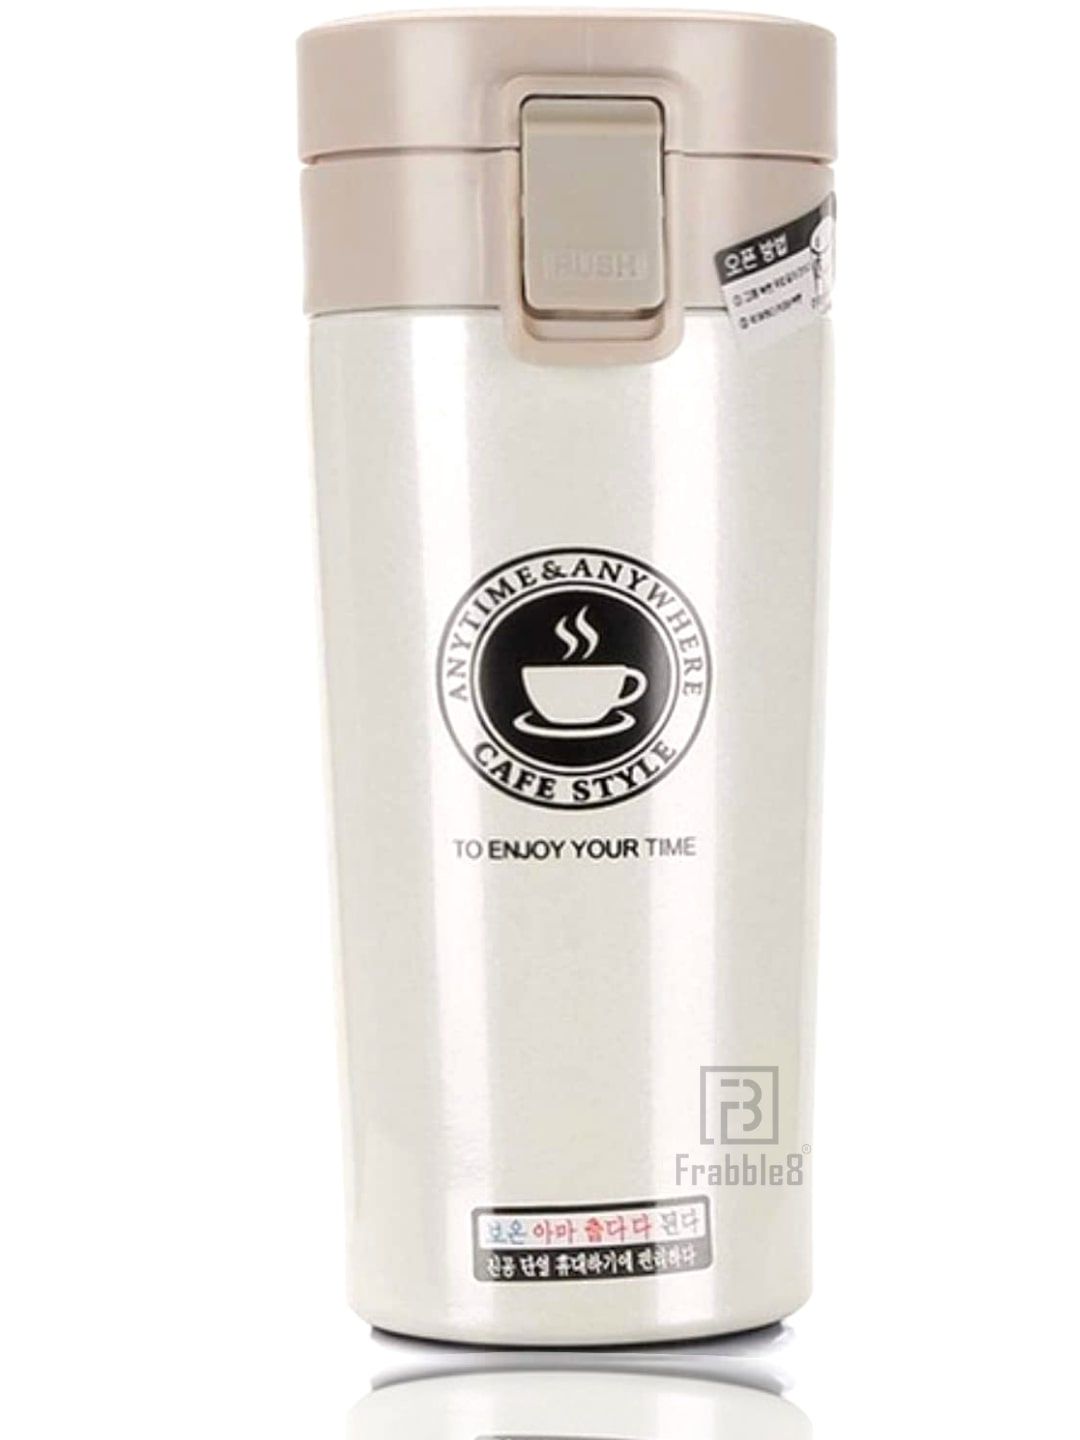 Frabble8 White Stainless Steel Vaccum Insulated 300ml Thermo Coffee Mug Price in India